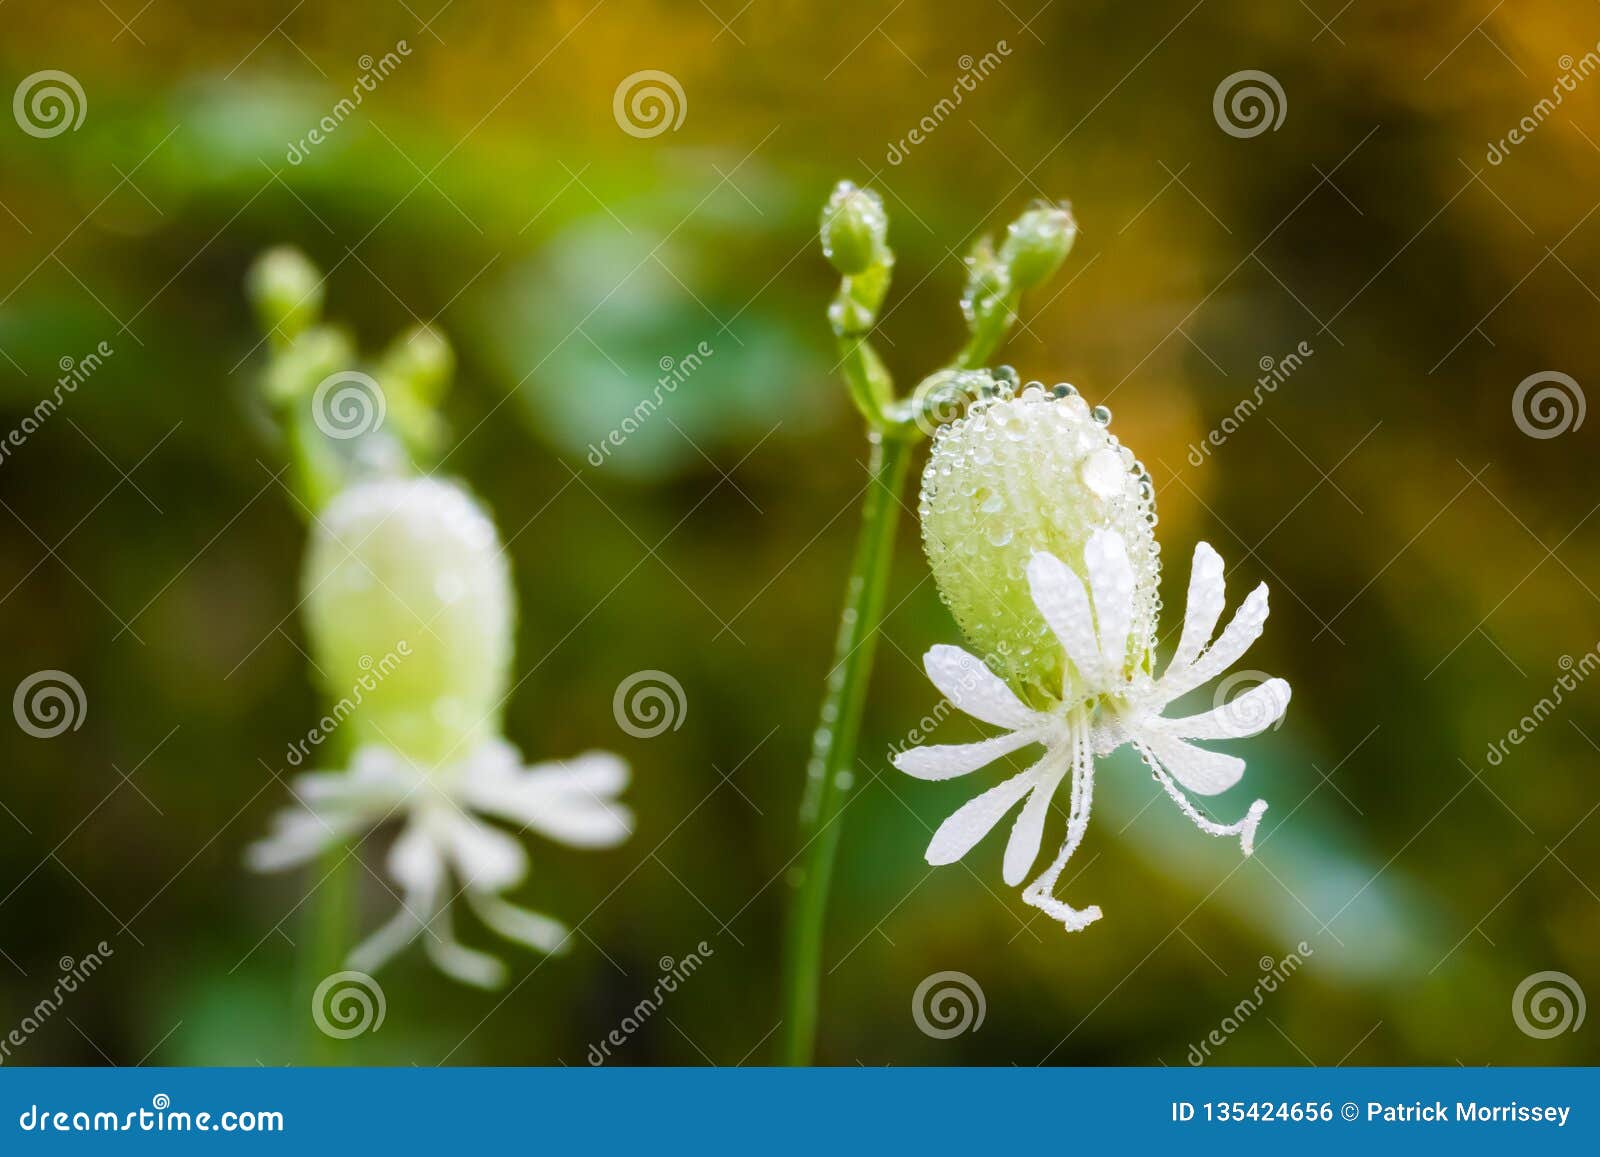  White  Wild Flower  With Dew  Drops  Stock Photo Image of 